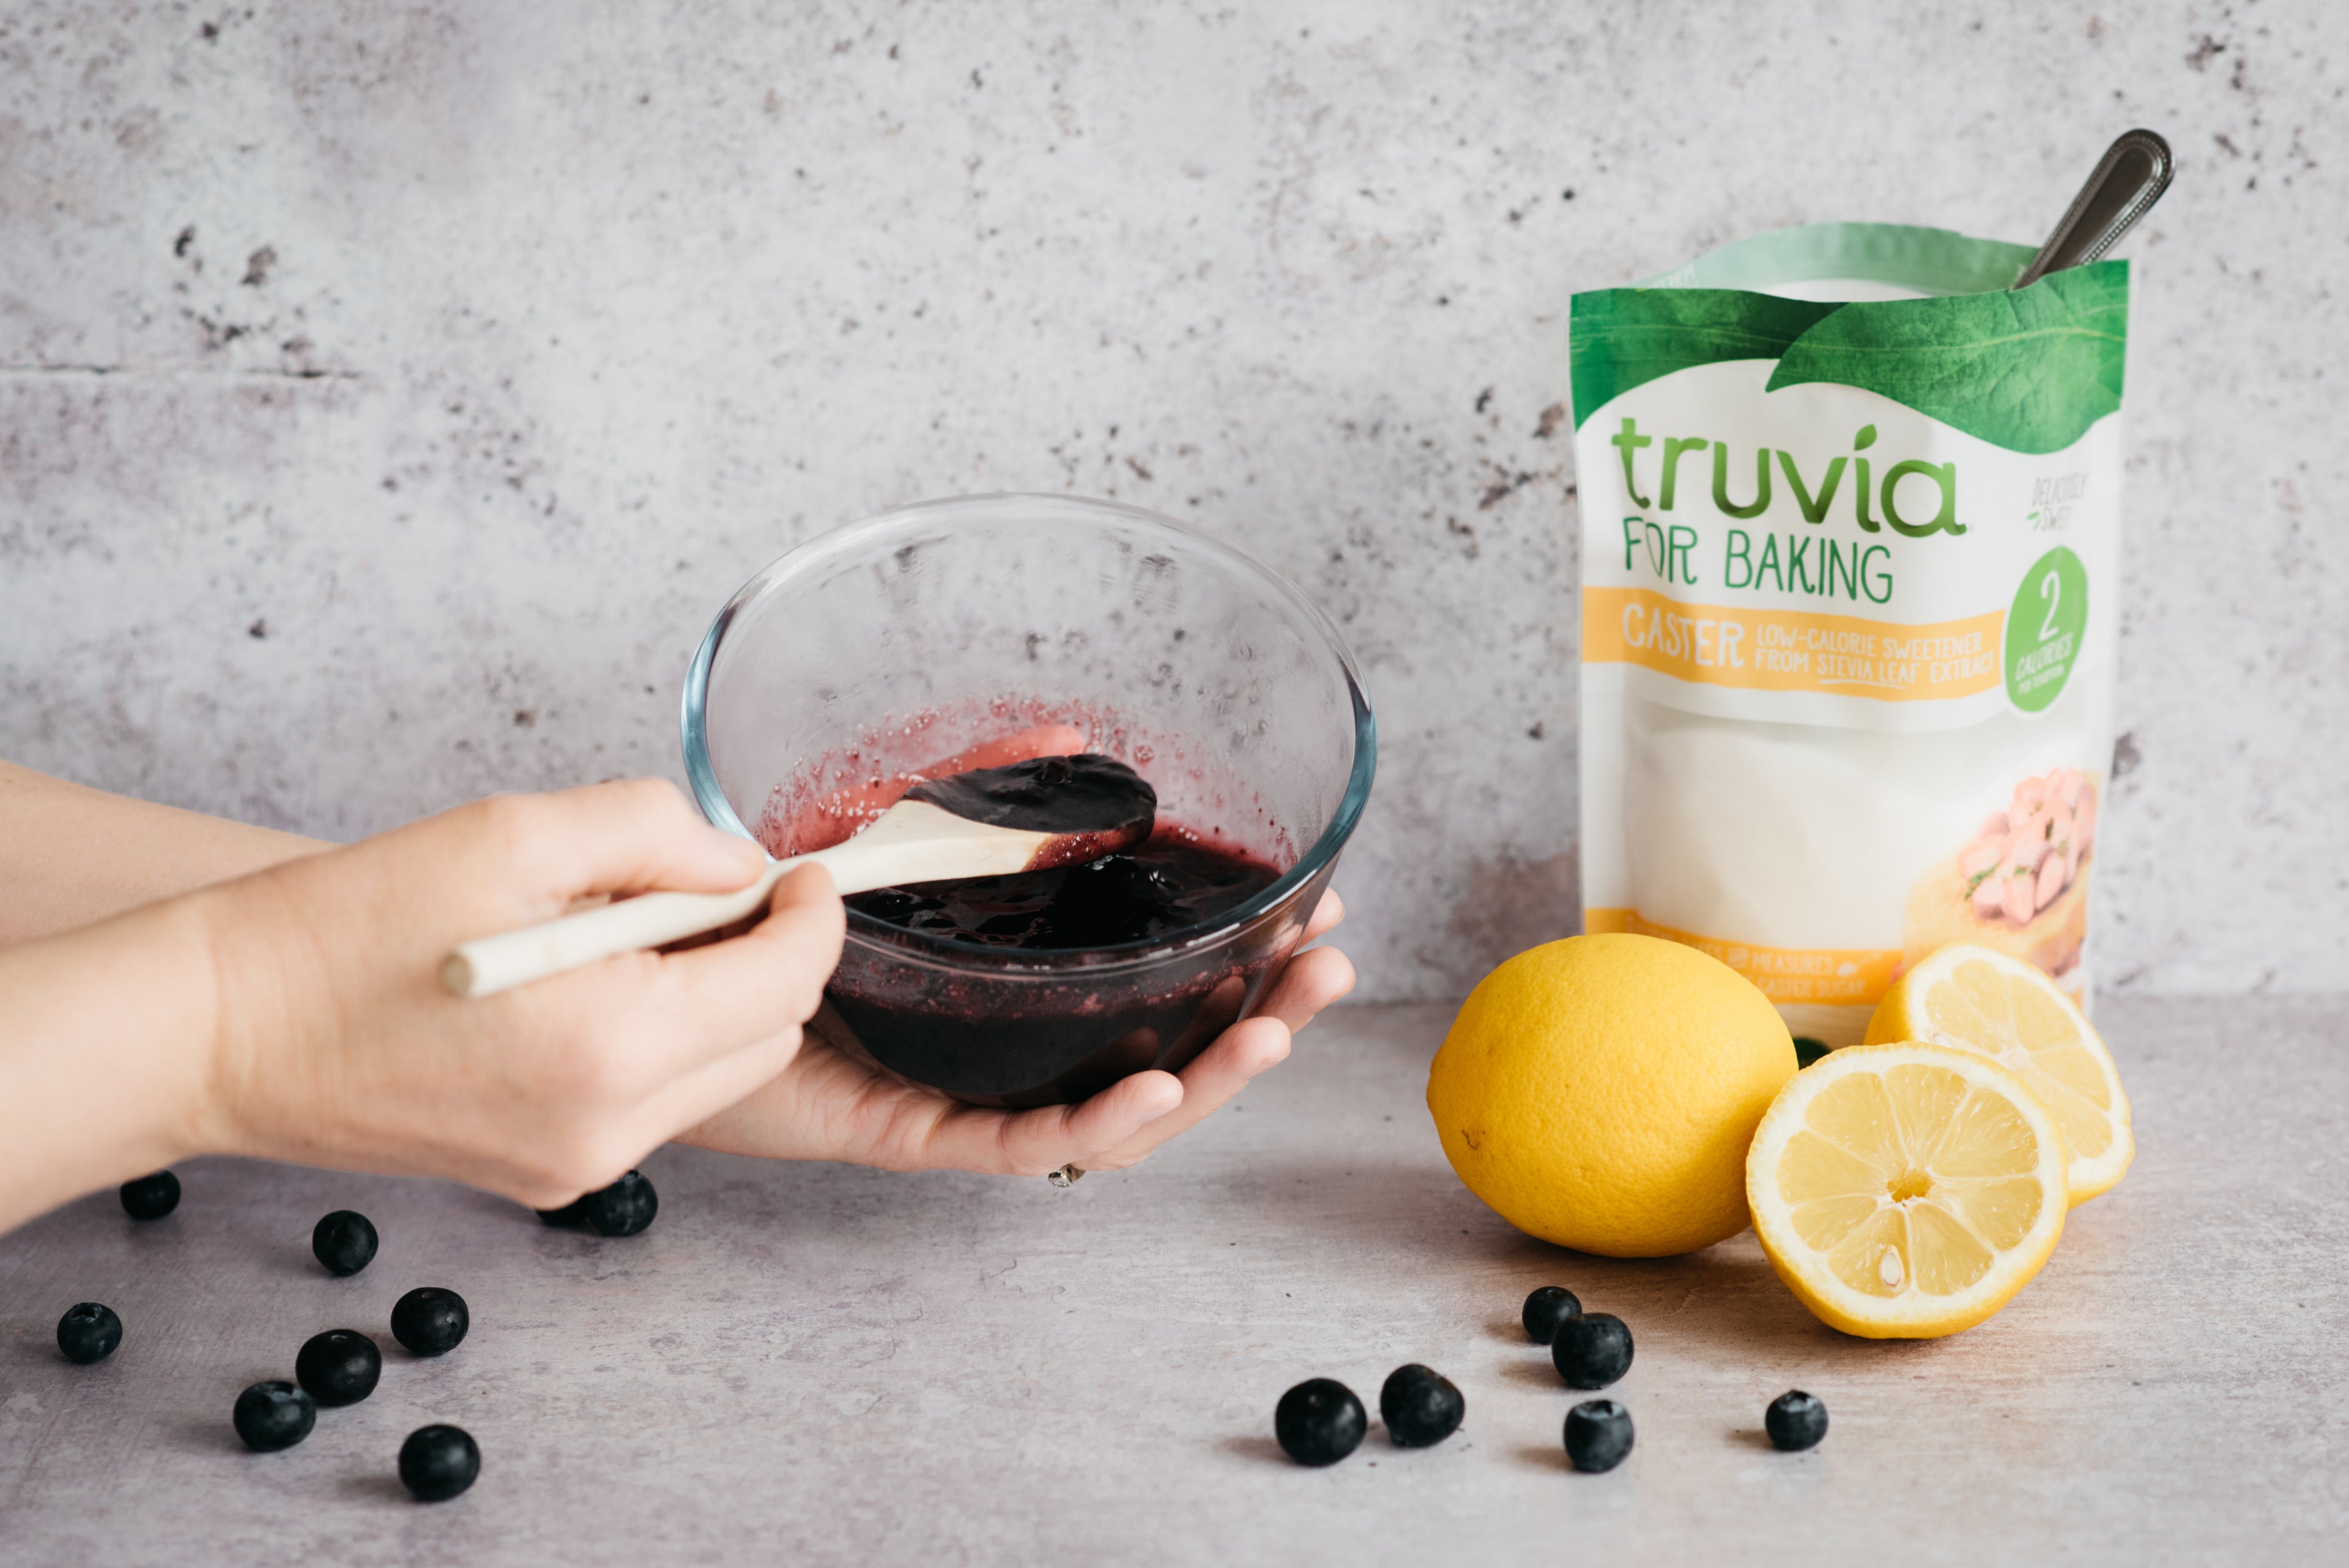 Hand mixing up the blueberry compote next to sliced fresh lemon, and a bag of Truvia for Baking Caster